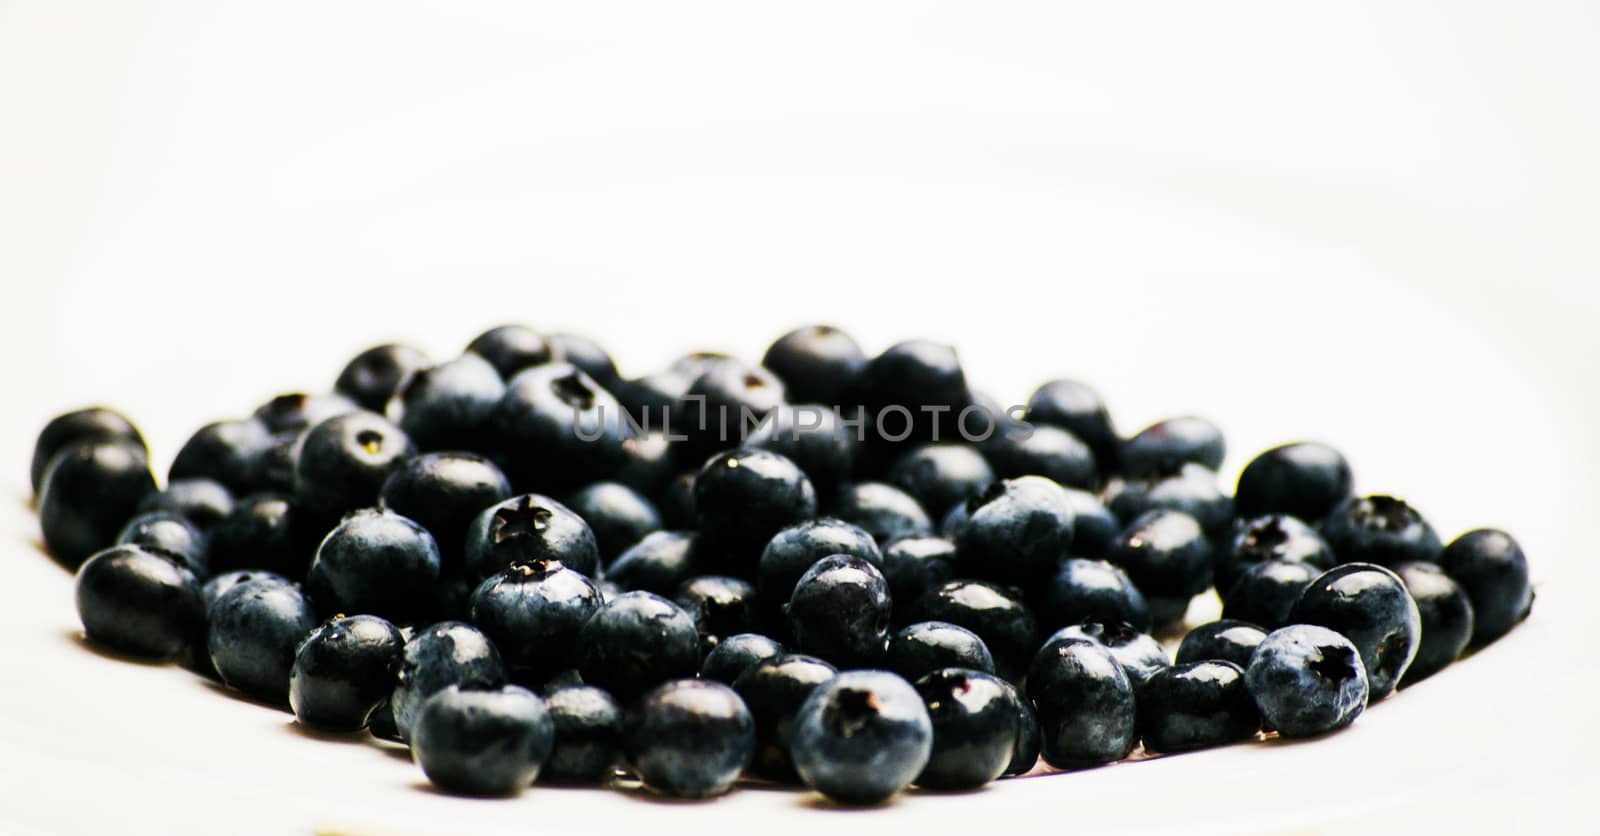 A moltitude of blueberries on a white background.